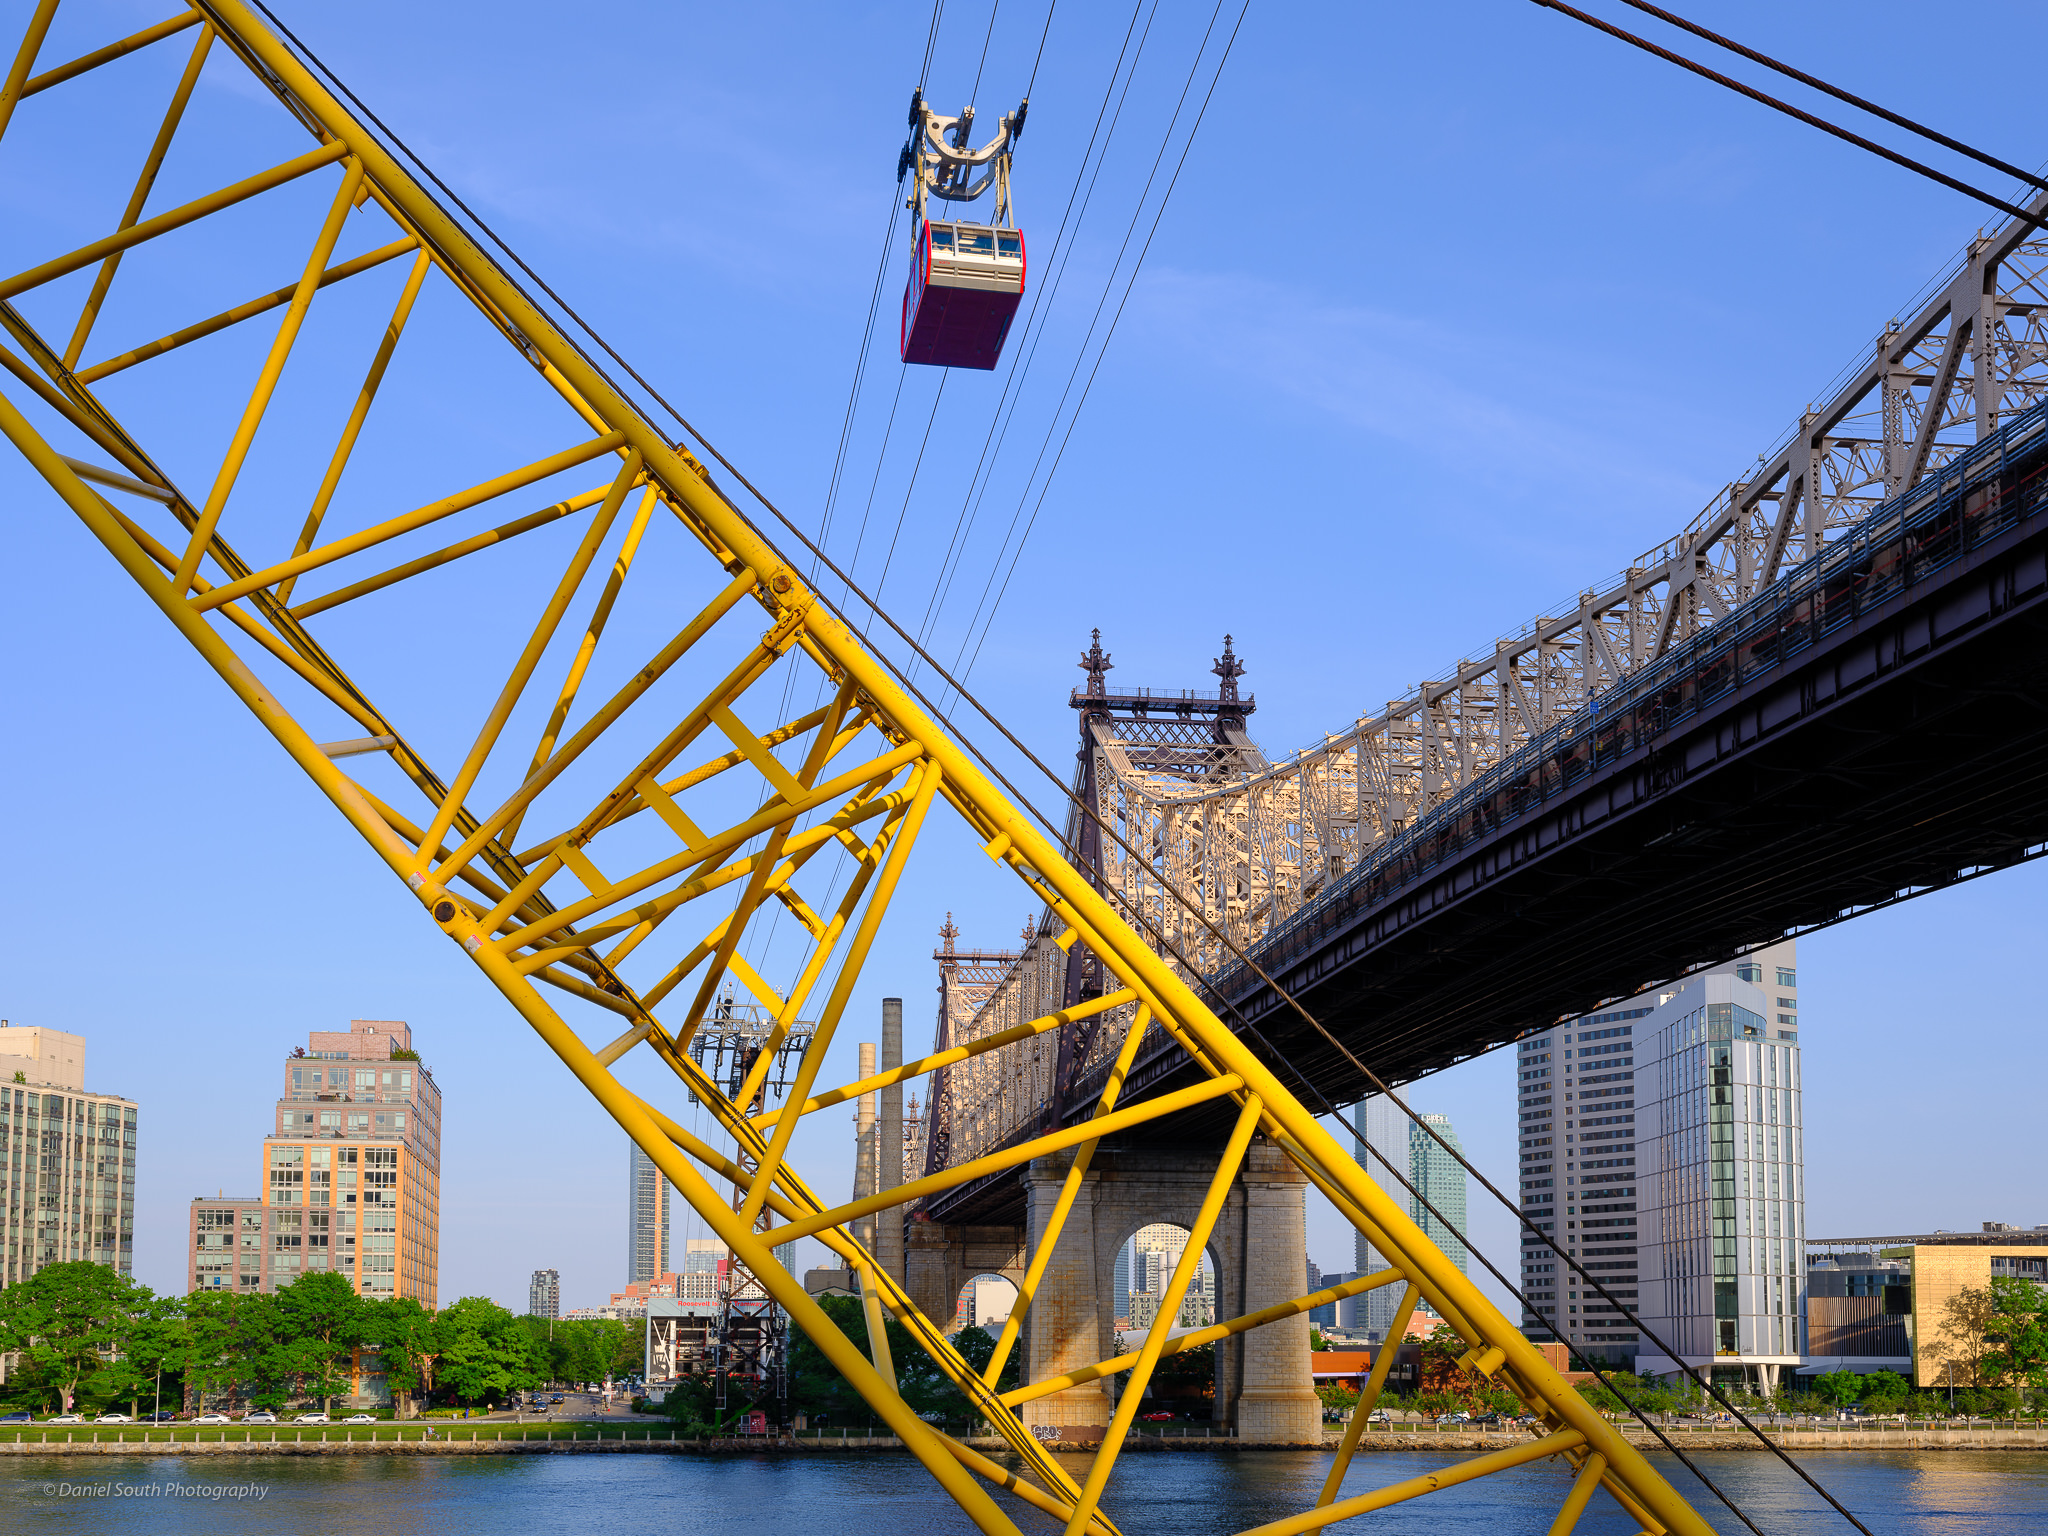 a photo of a yellow crane and a cable car near the queensboro bridge in new york